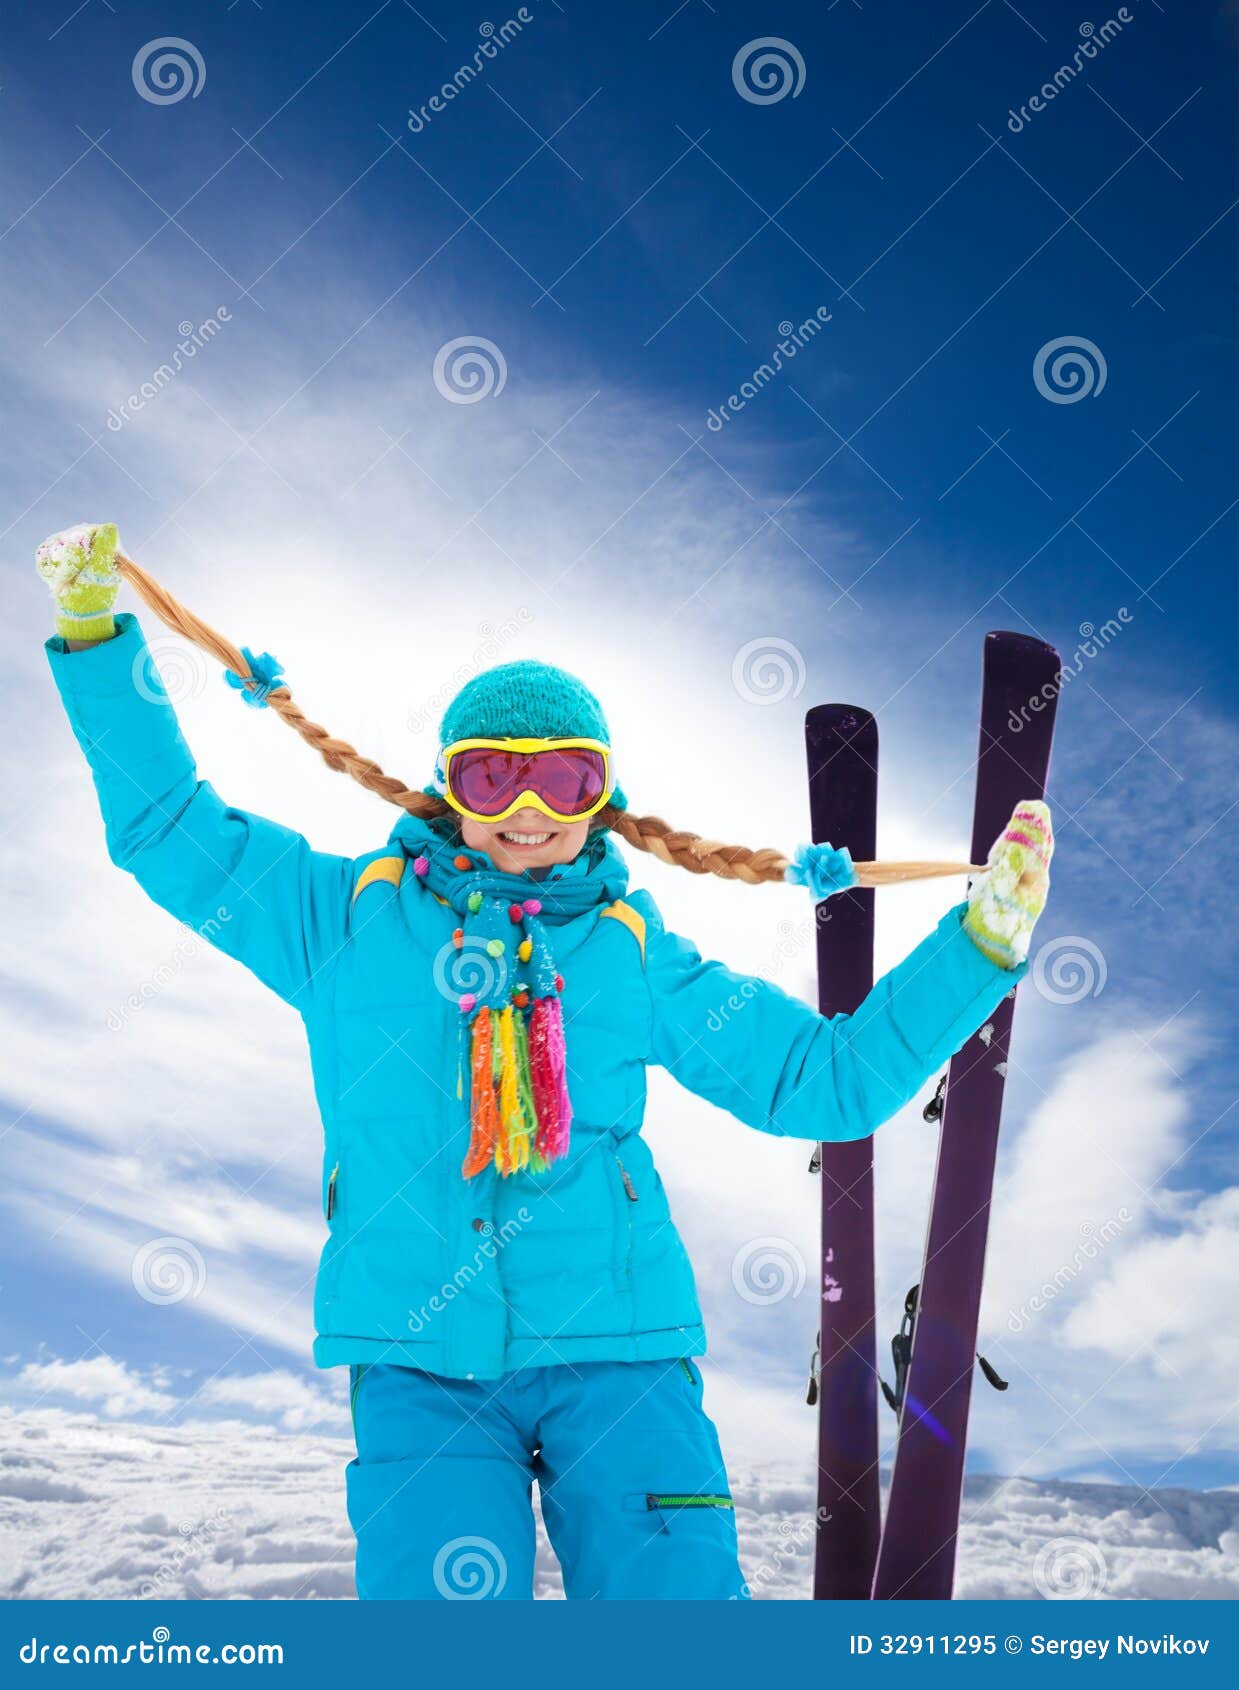 Blond, Cute Girl on Ski Winter Vacation Stock Image - Image of